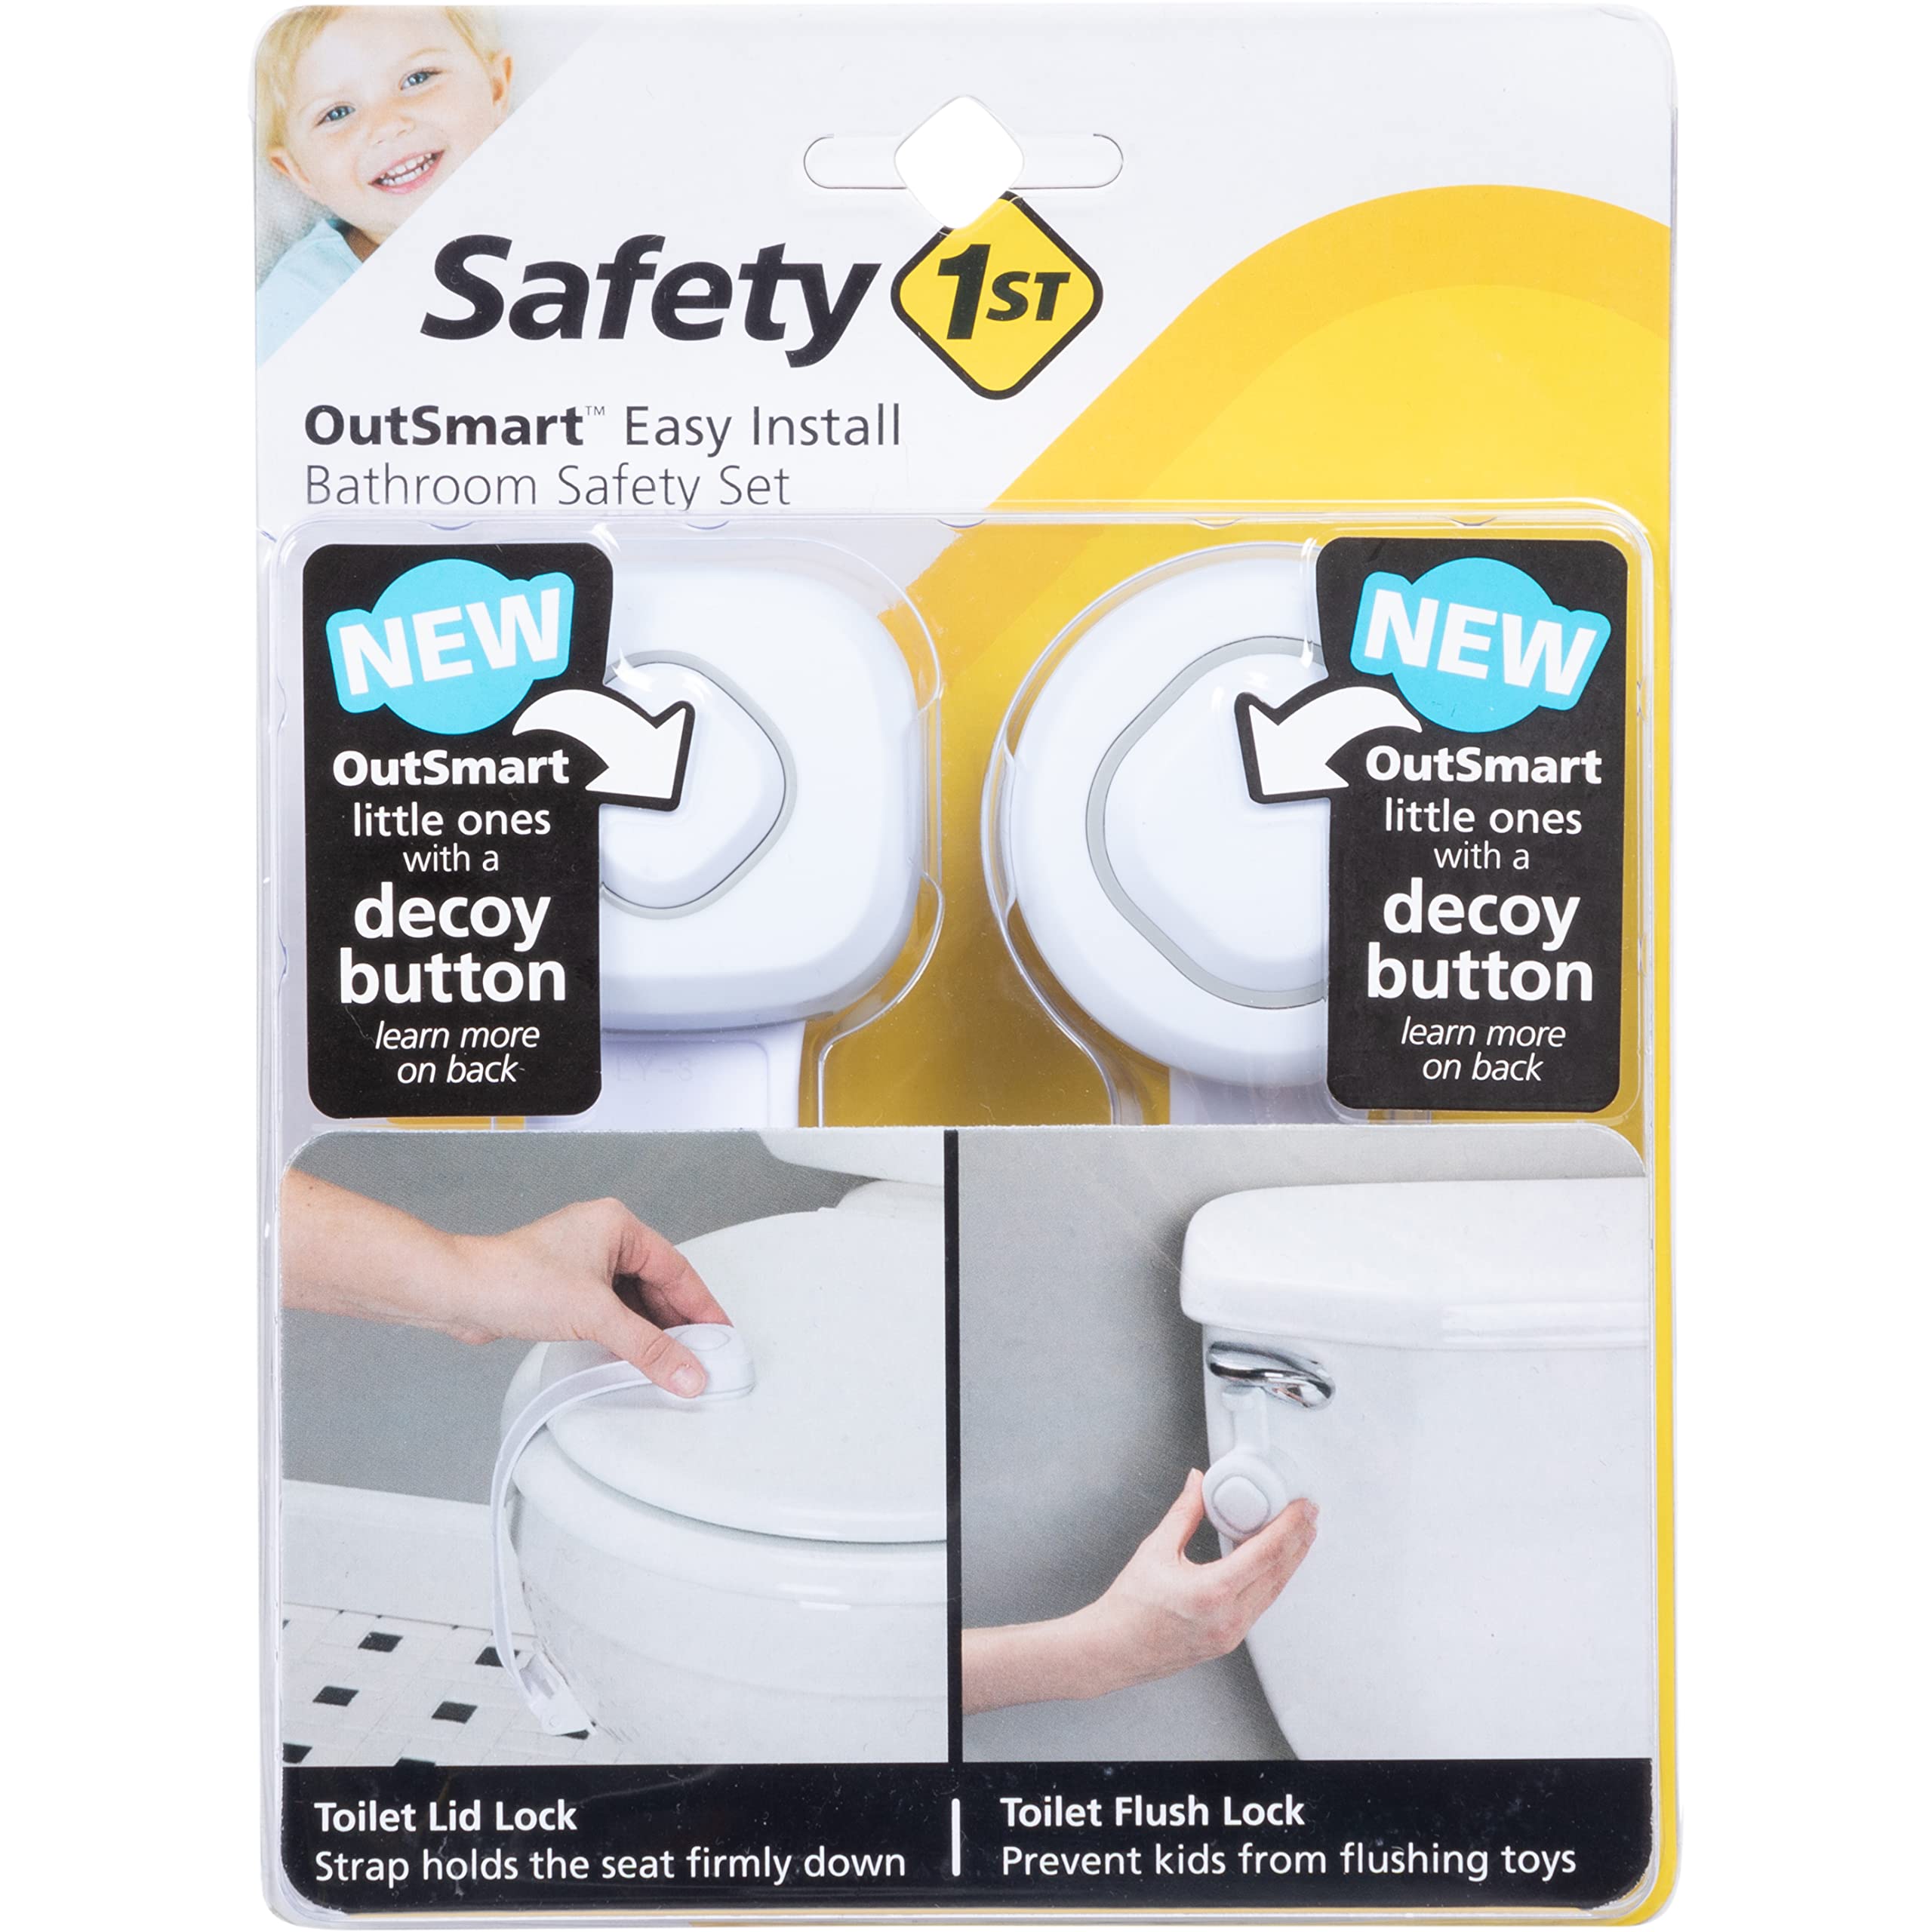 Safety 1st Room Solutions: No-Tools Baby Proof Bathroom Safety Kit - Includes Locks for Toilet